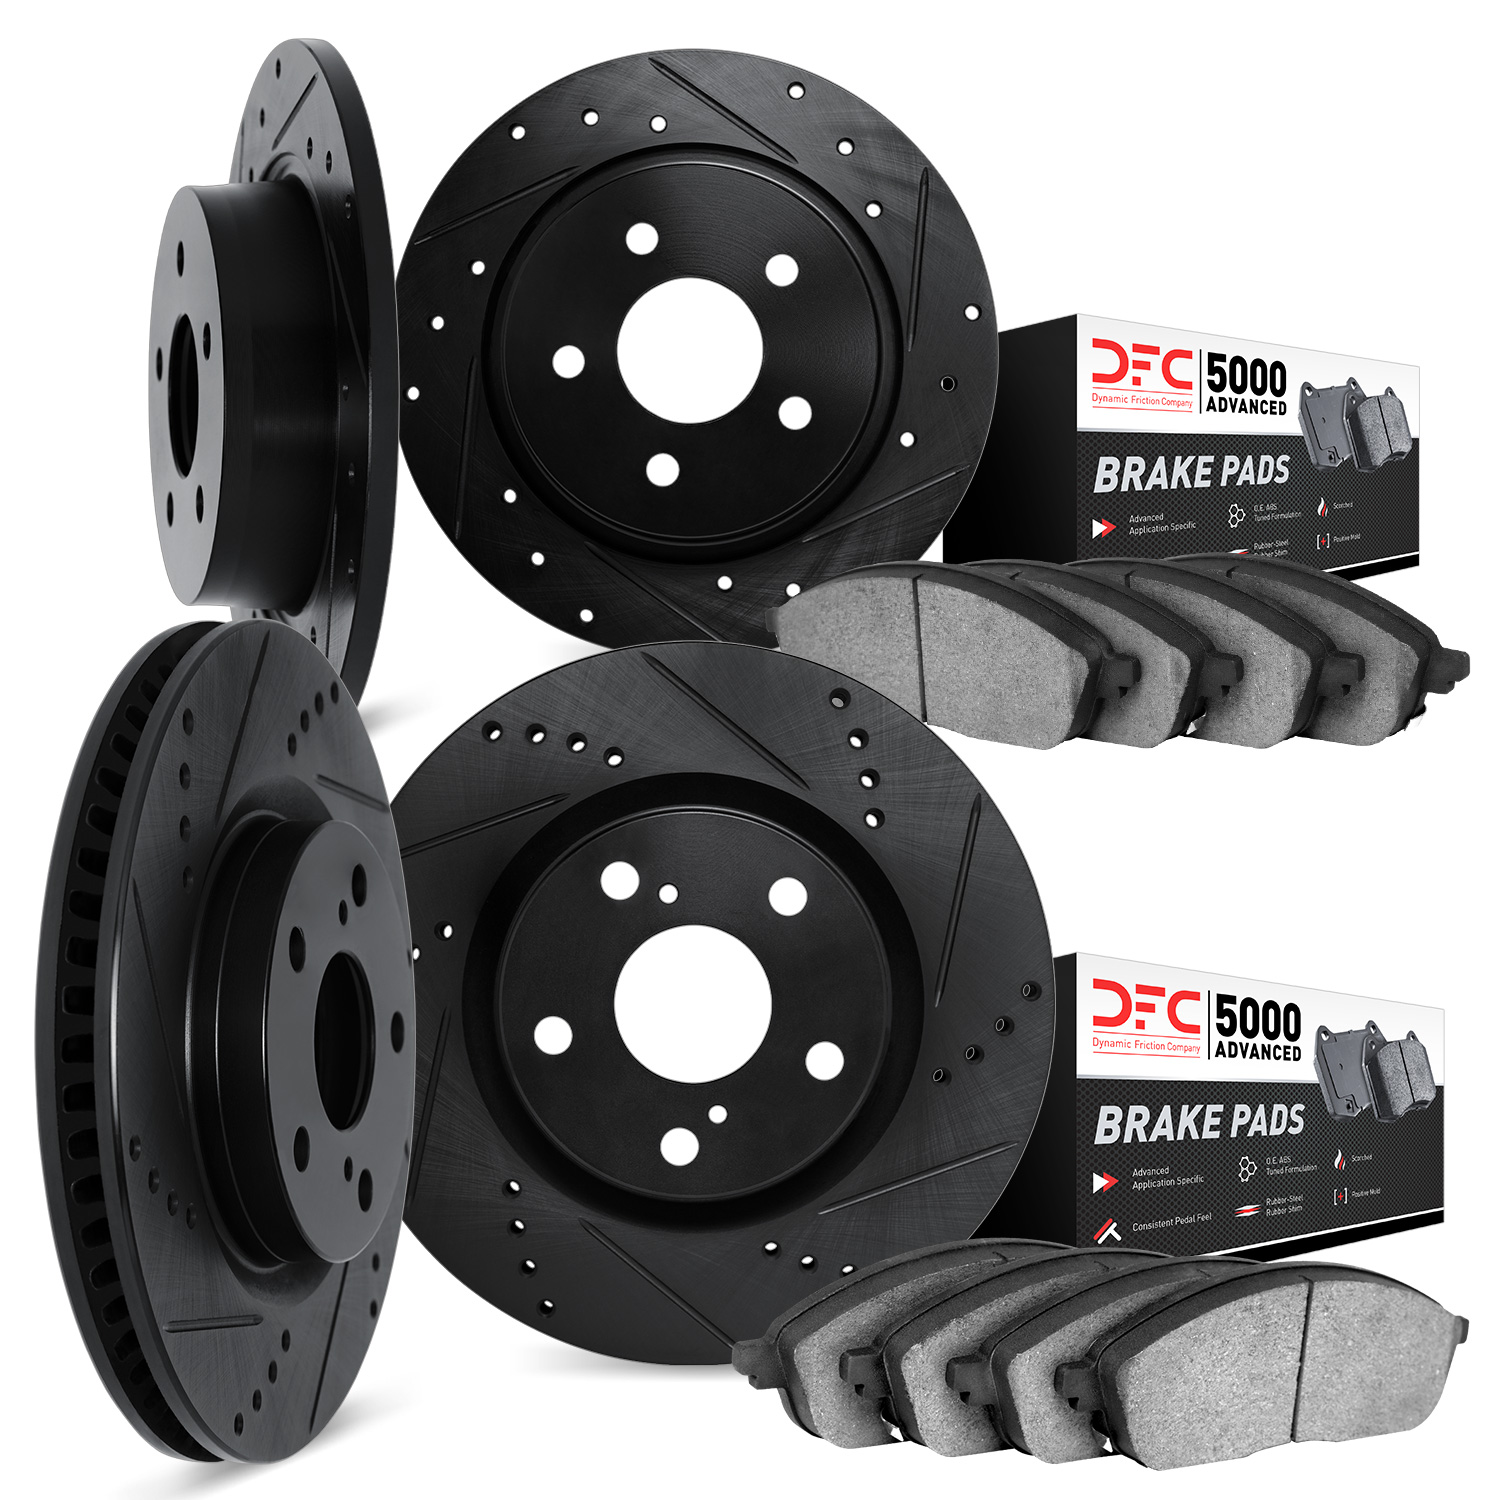 8504-67100 Drilled/Slotted Brake Rotors w/5000 Advanced Brake Pads Kit [Black], 2010-2014 Renault, Position: Front and Rear